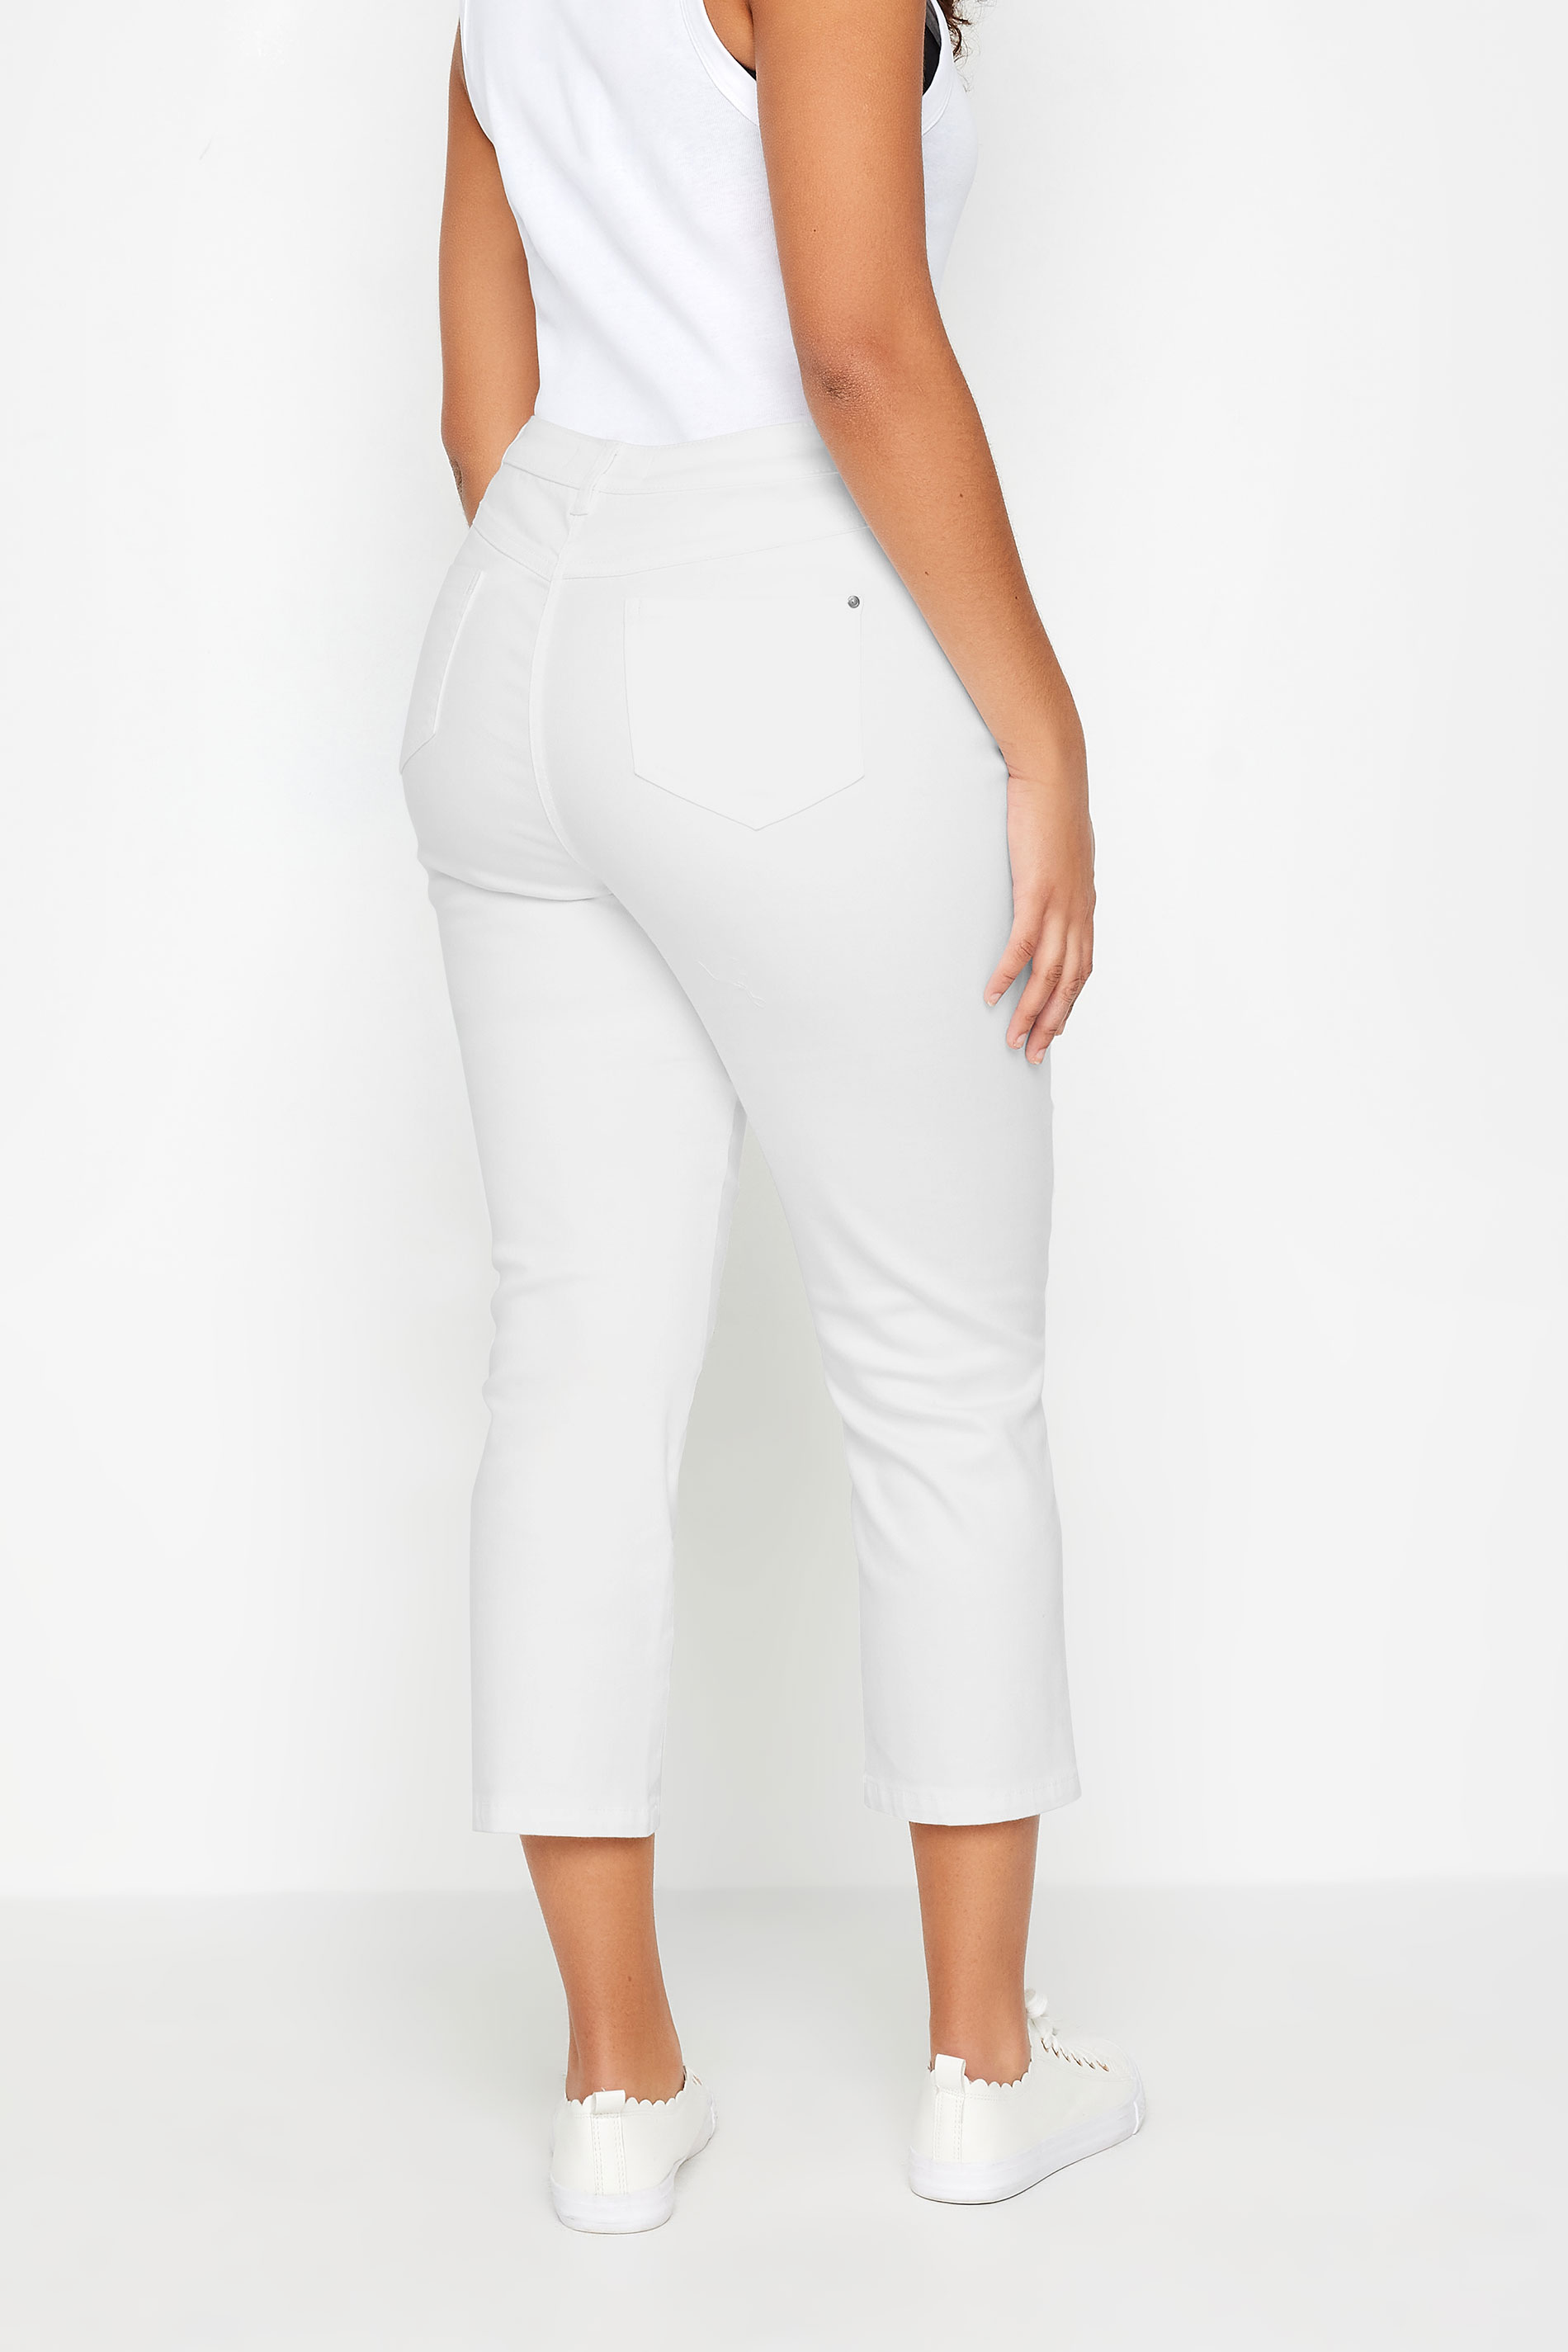 M&Co White Cropped Jeans | M&Co 3